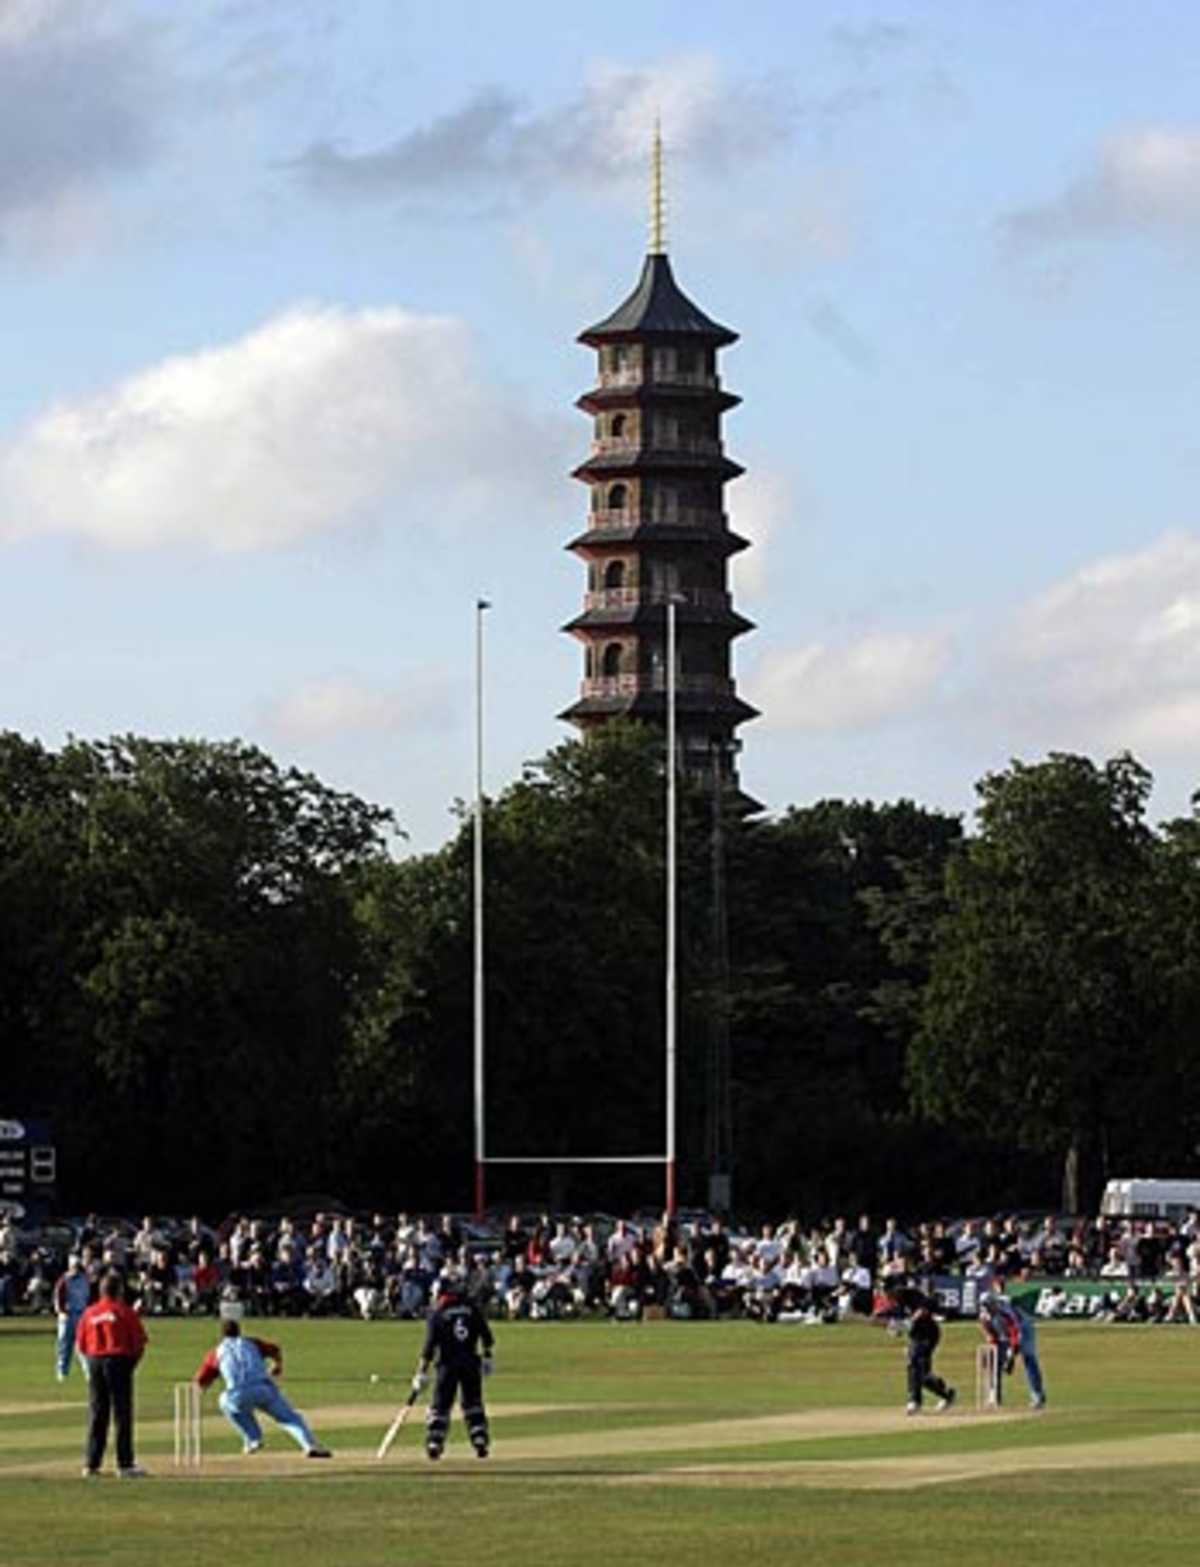 A general view of the ground during the Twenty20 match between Middlesex and Kent, Kew Gardens, June 19, 2003